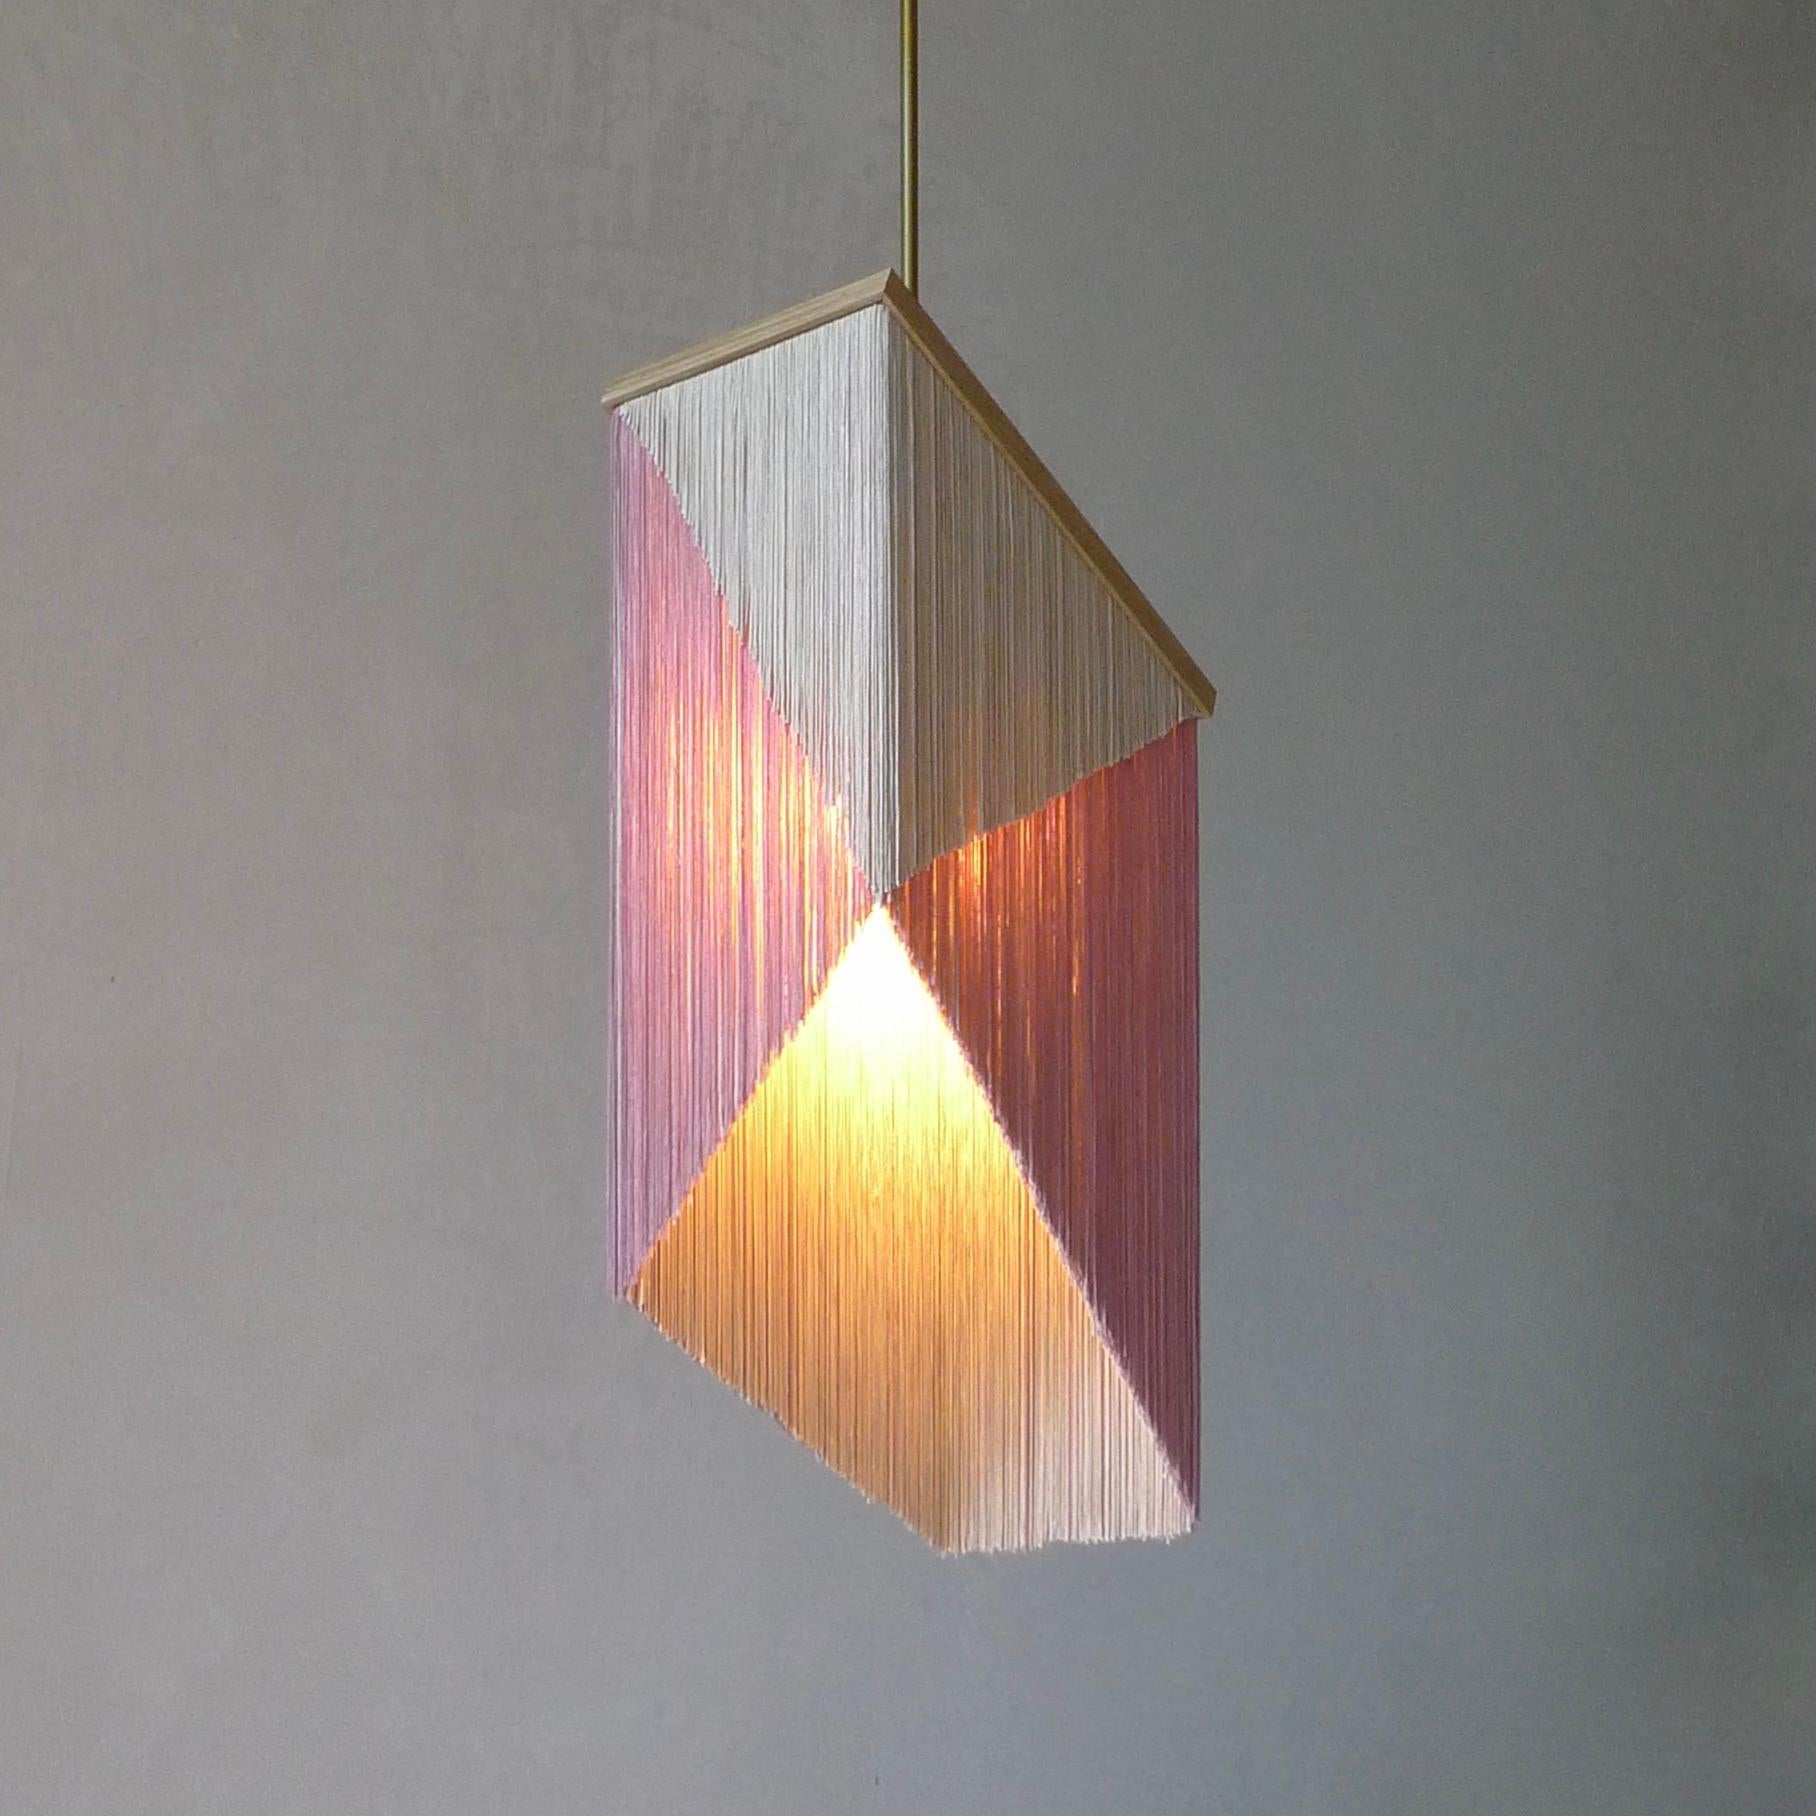 No. 26 pendant lamp by Sander Bottinga
Objet size 1
Dimensions: H 46 -71 x W 31 x D 17 cm
Materials: brass, wood, leather, Viscose Fringes
Variations available. 

Handmade in brass, wood, leather and 3 double layered viscose fringes